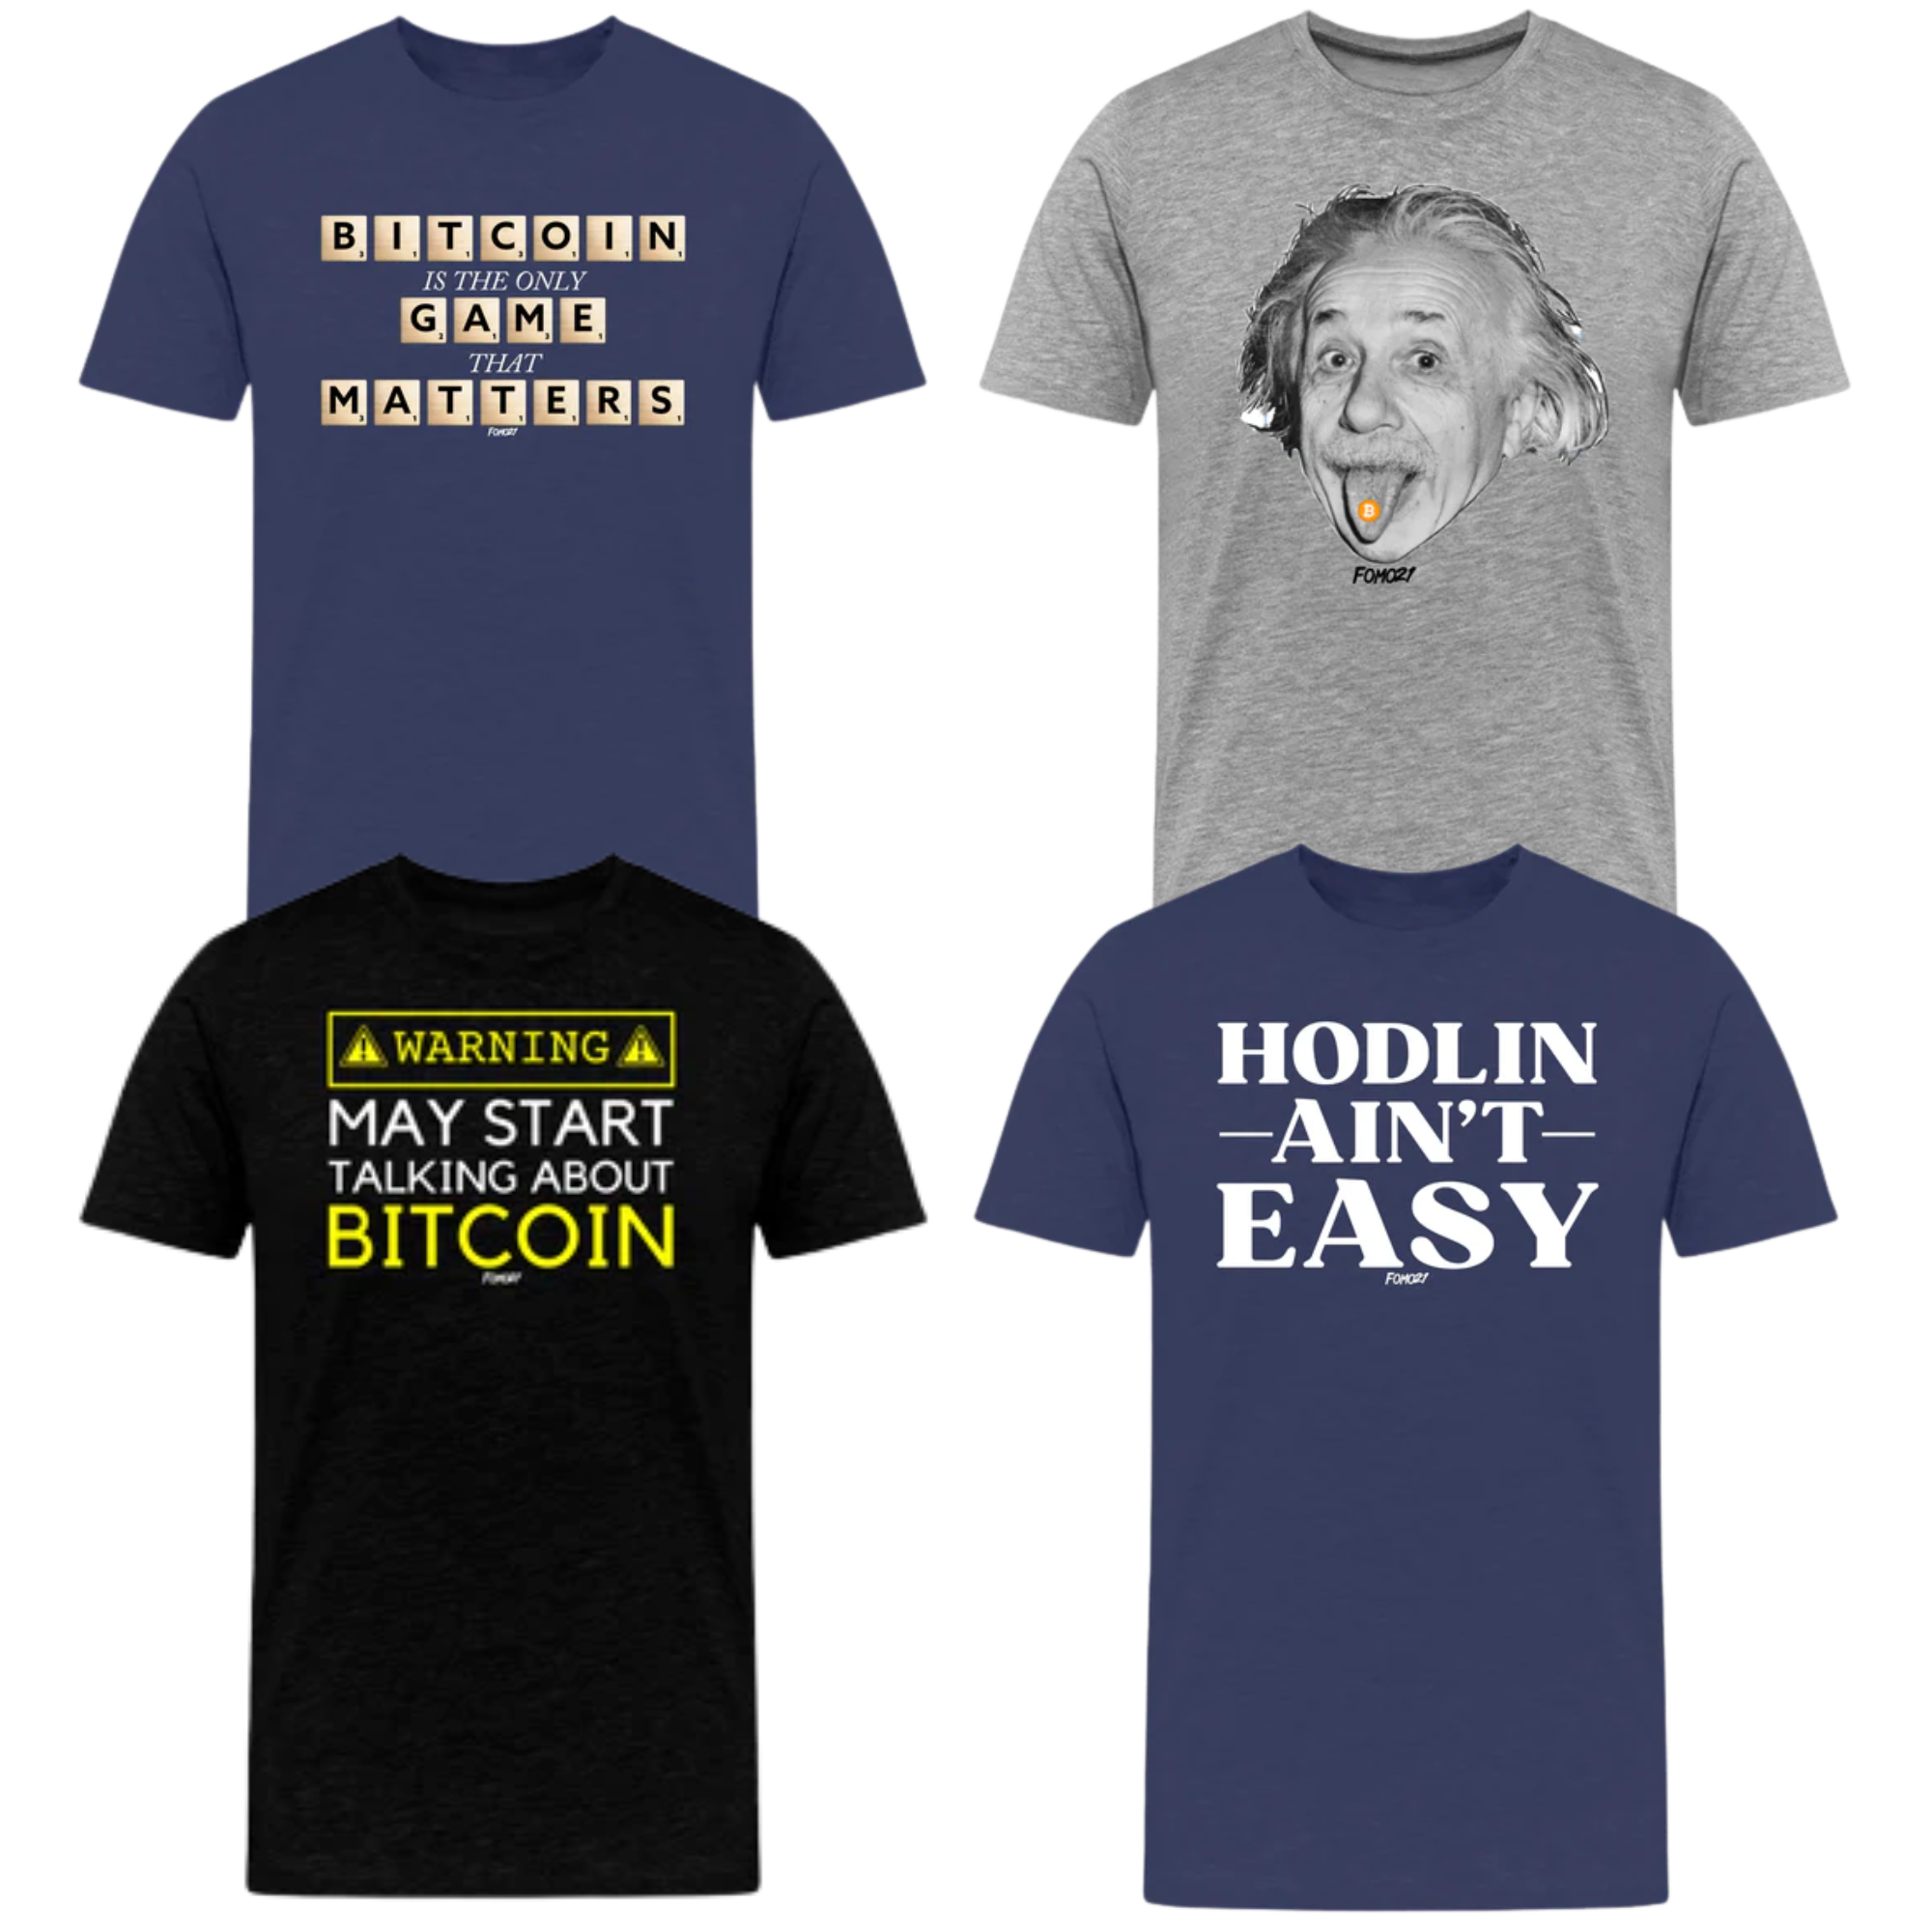 New Bitcoin Shirt Designs at FOMO21.com: The Perfect Way to Start the New Year!